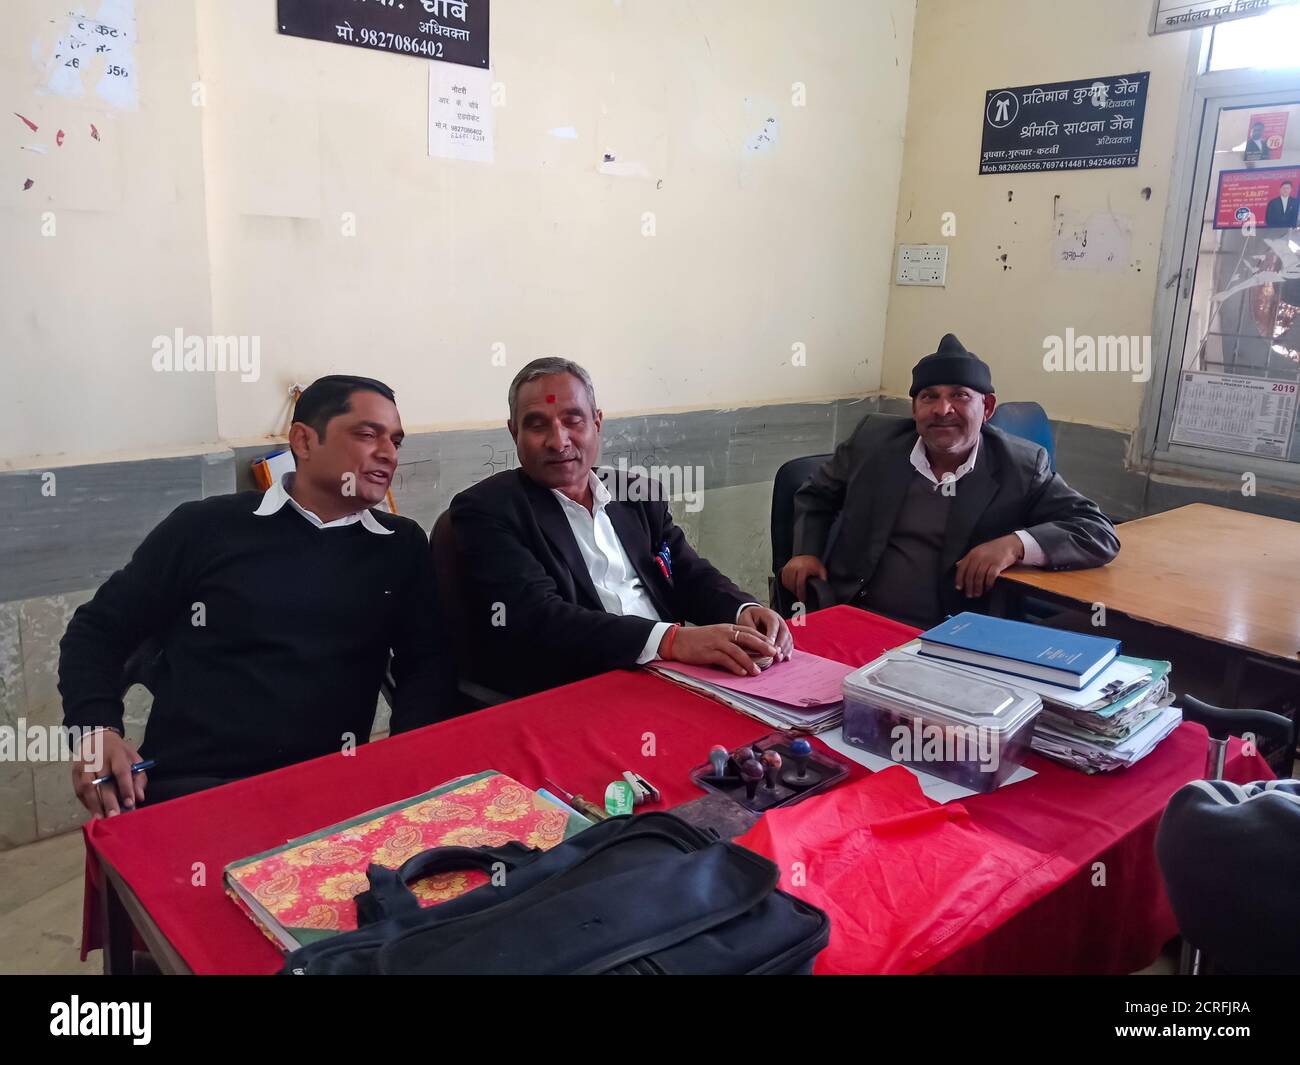 DISTRICT KATNI, INDIA - JANUARY 27, 2020: Indian lawyer group working in office room at Supreme court premises. Stock Photo